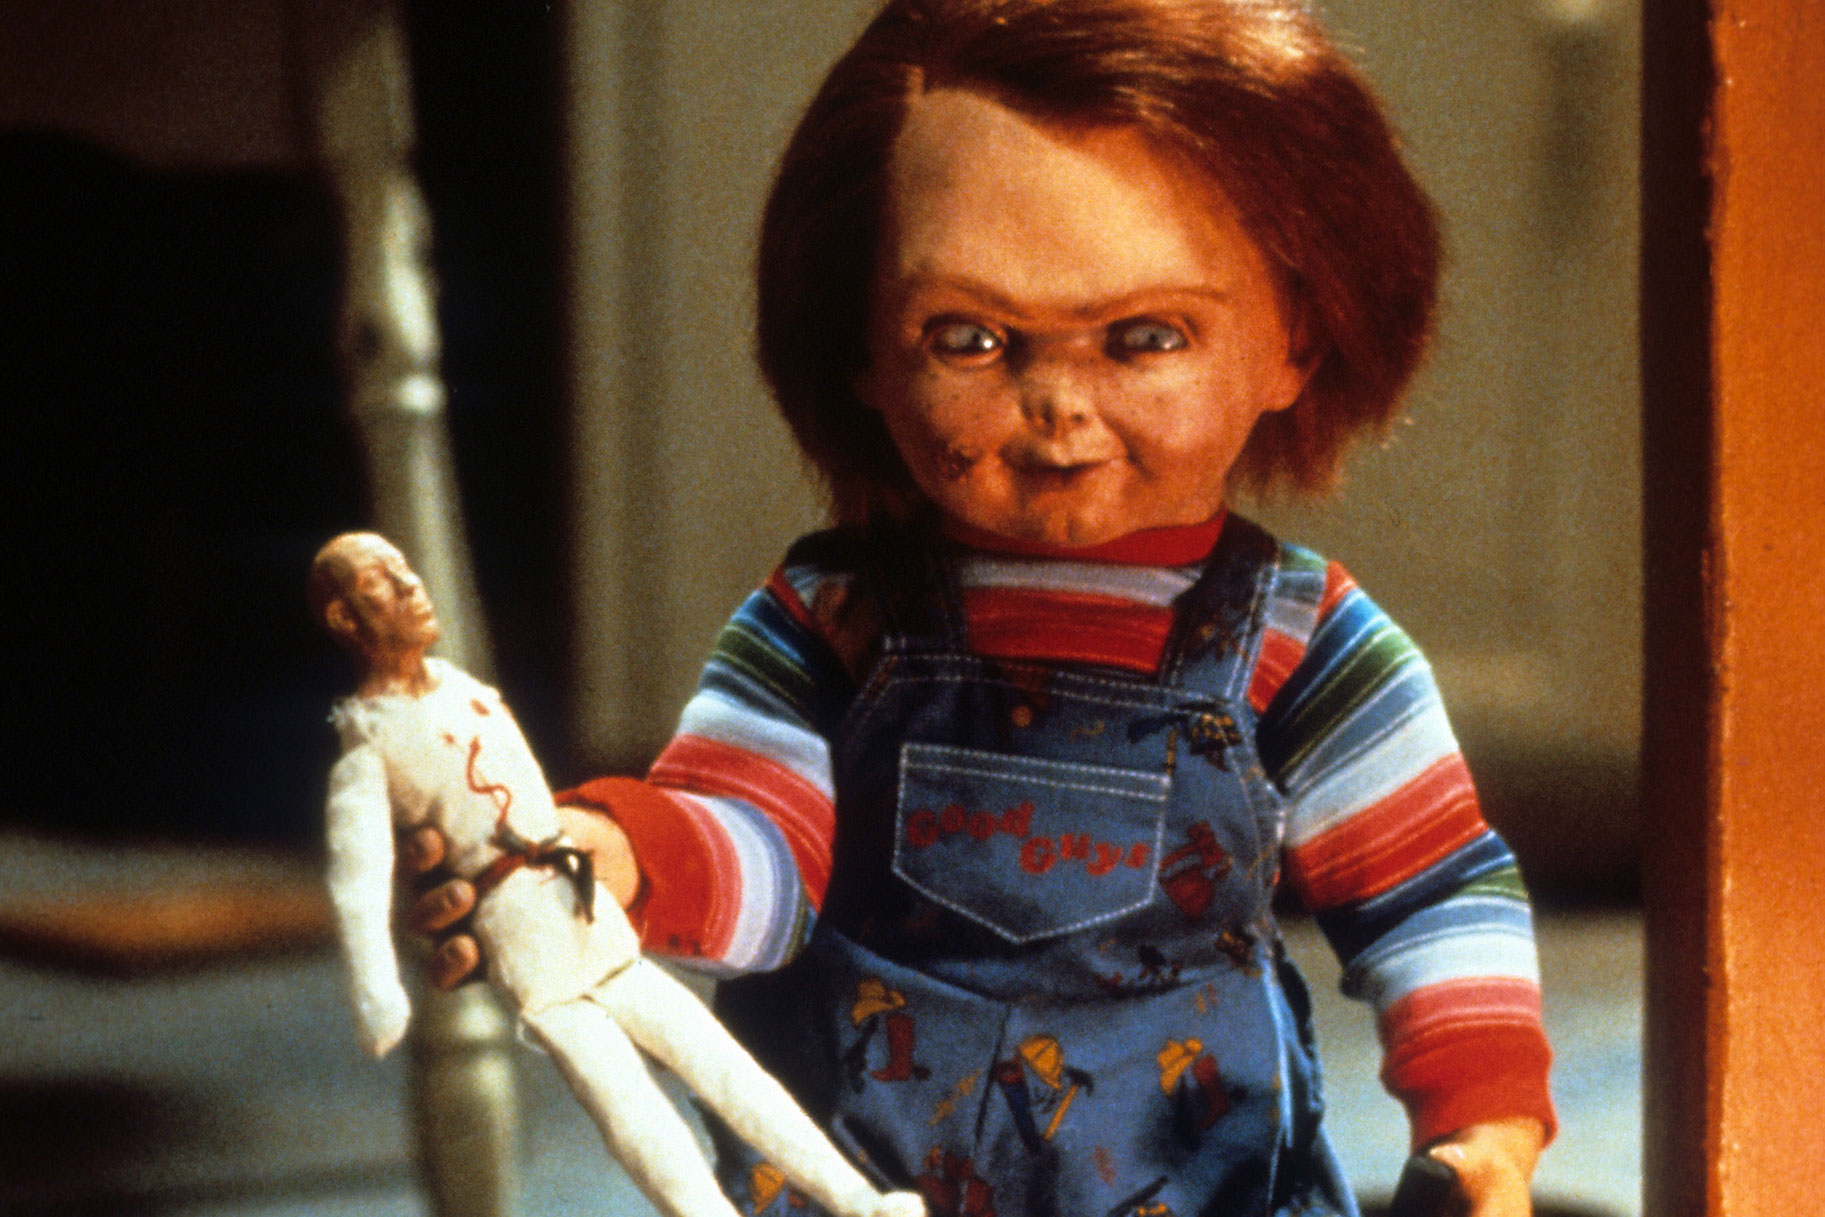 An Encounter With Annabelle, the Real-Life Haunted Doll From 'The